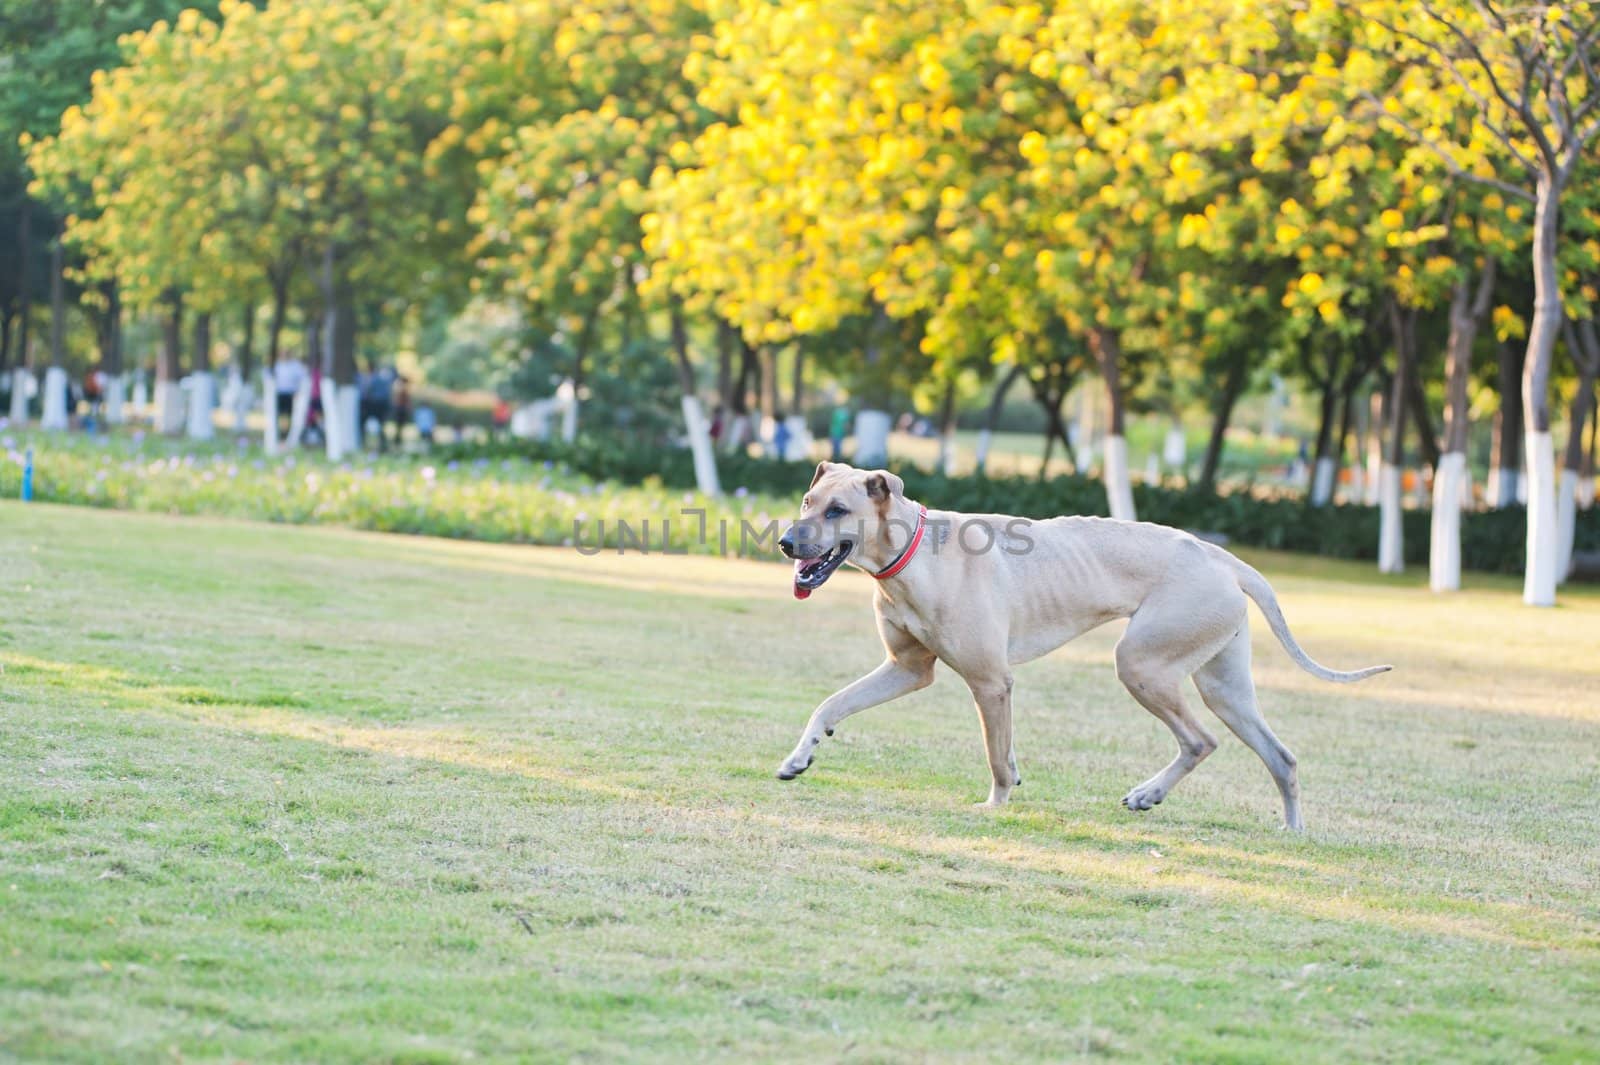 A dog running on the lawn in the park